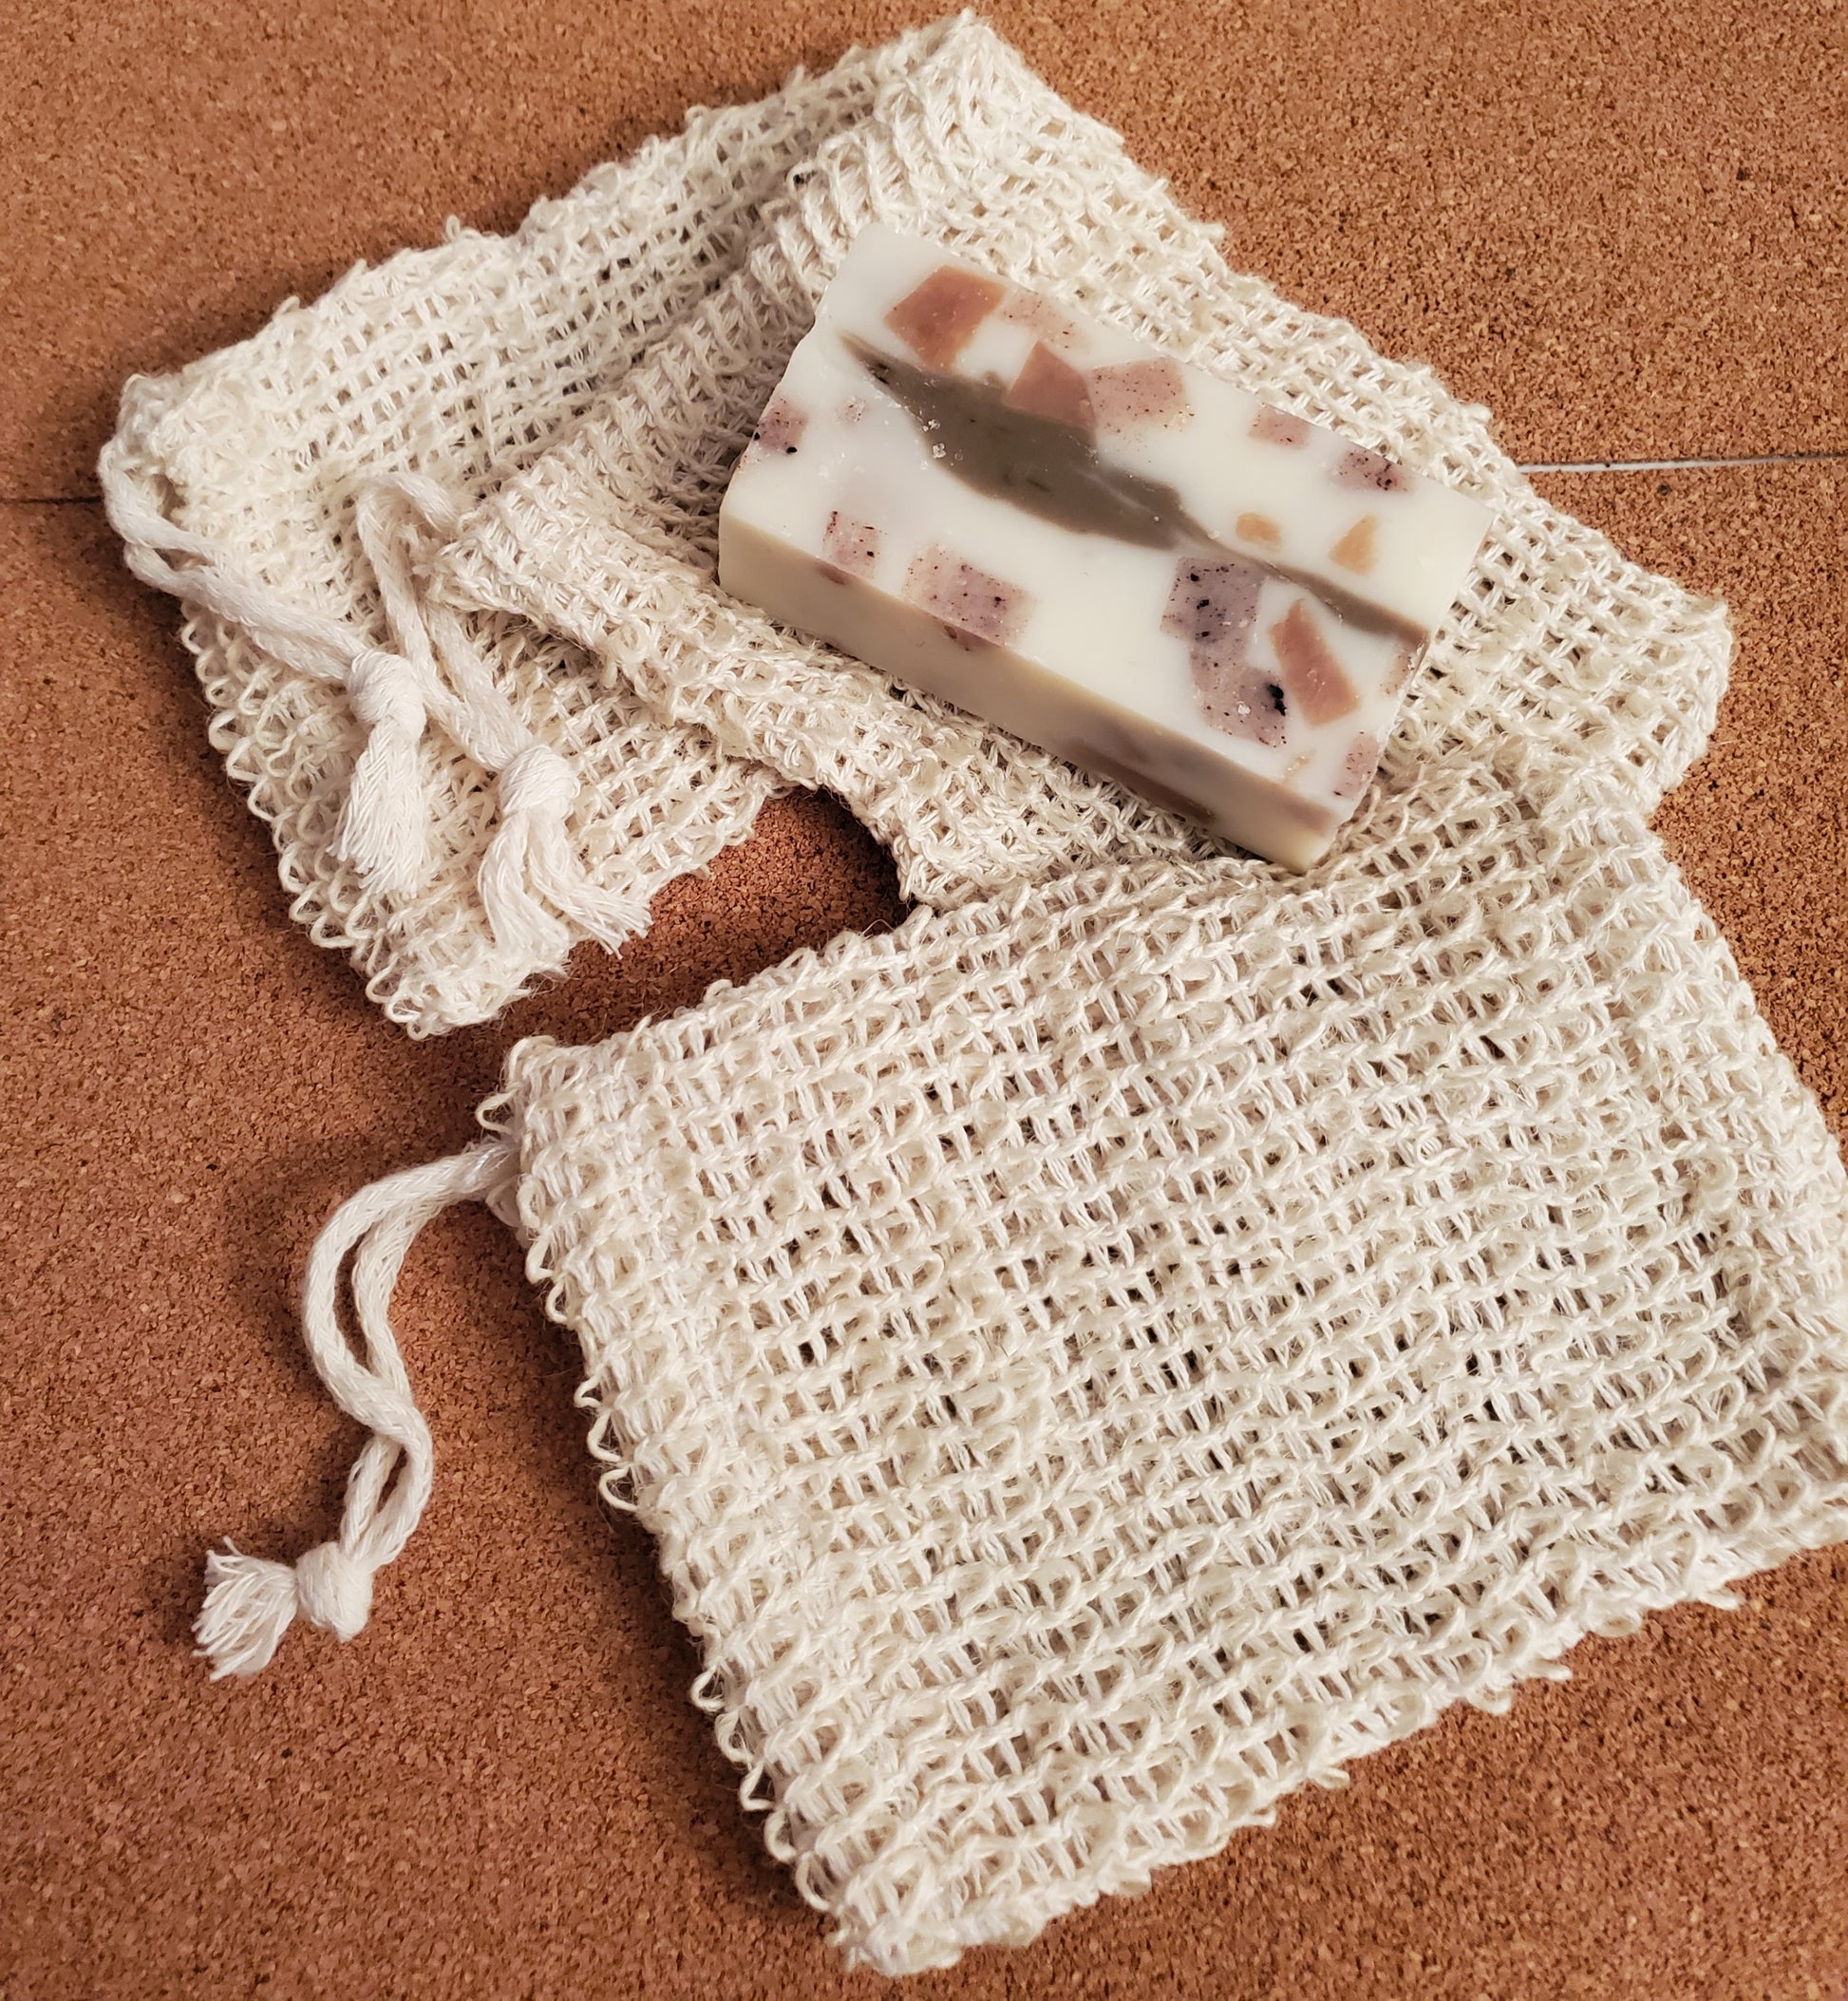 3 Scrubby Soap Bags shown together with Calico All in One bar